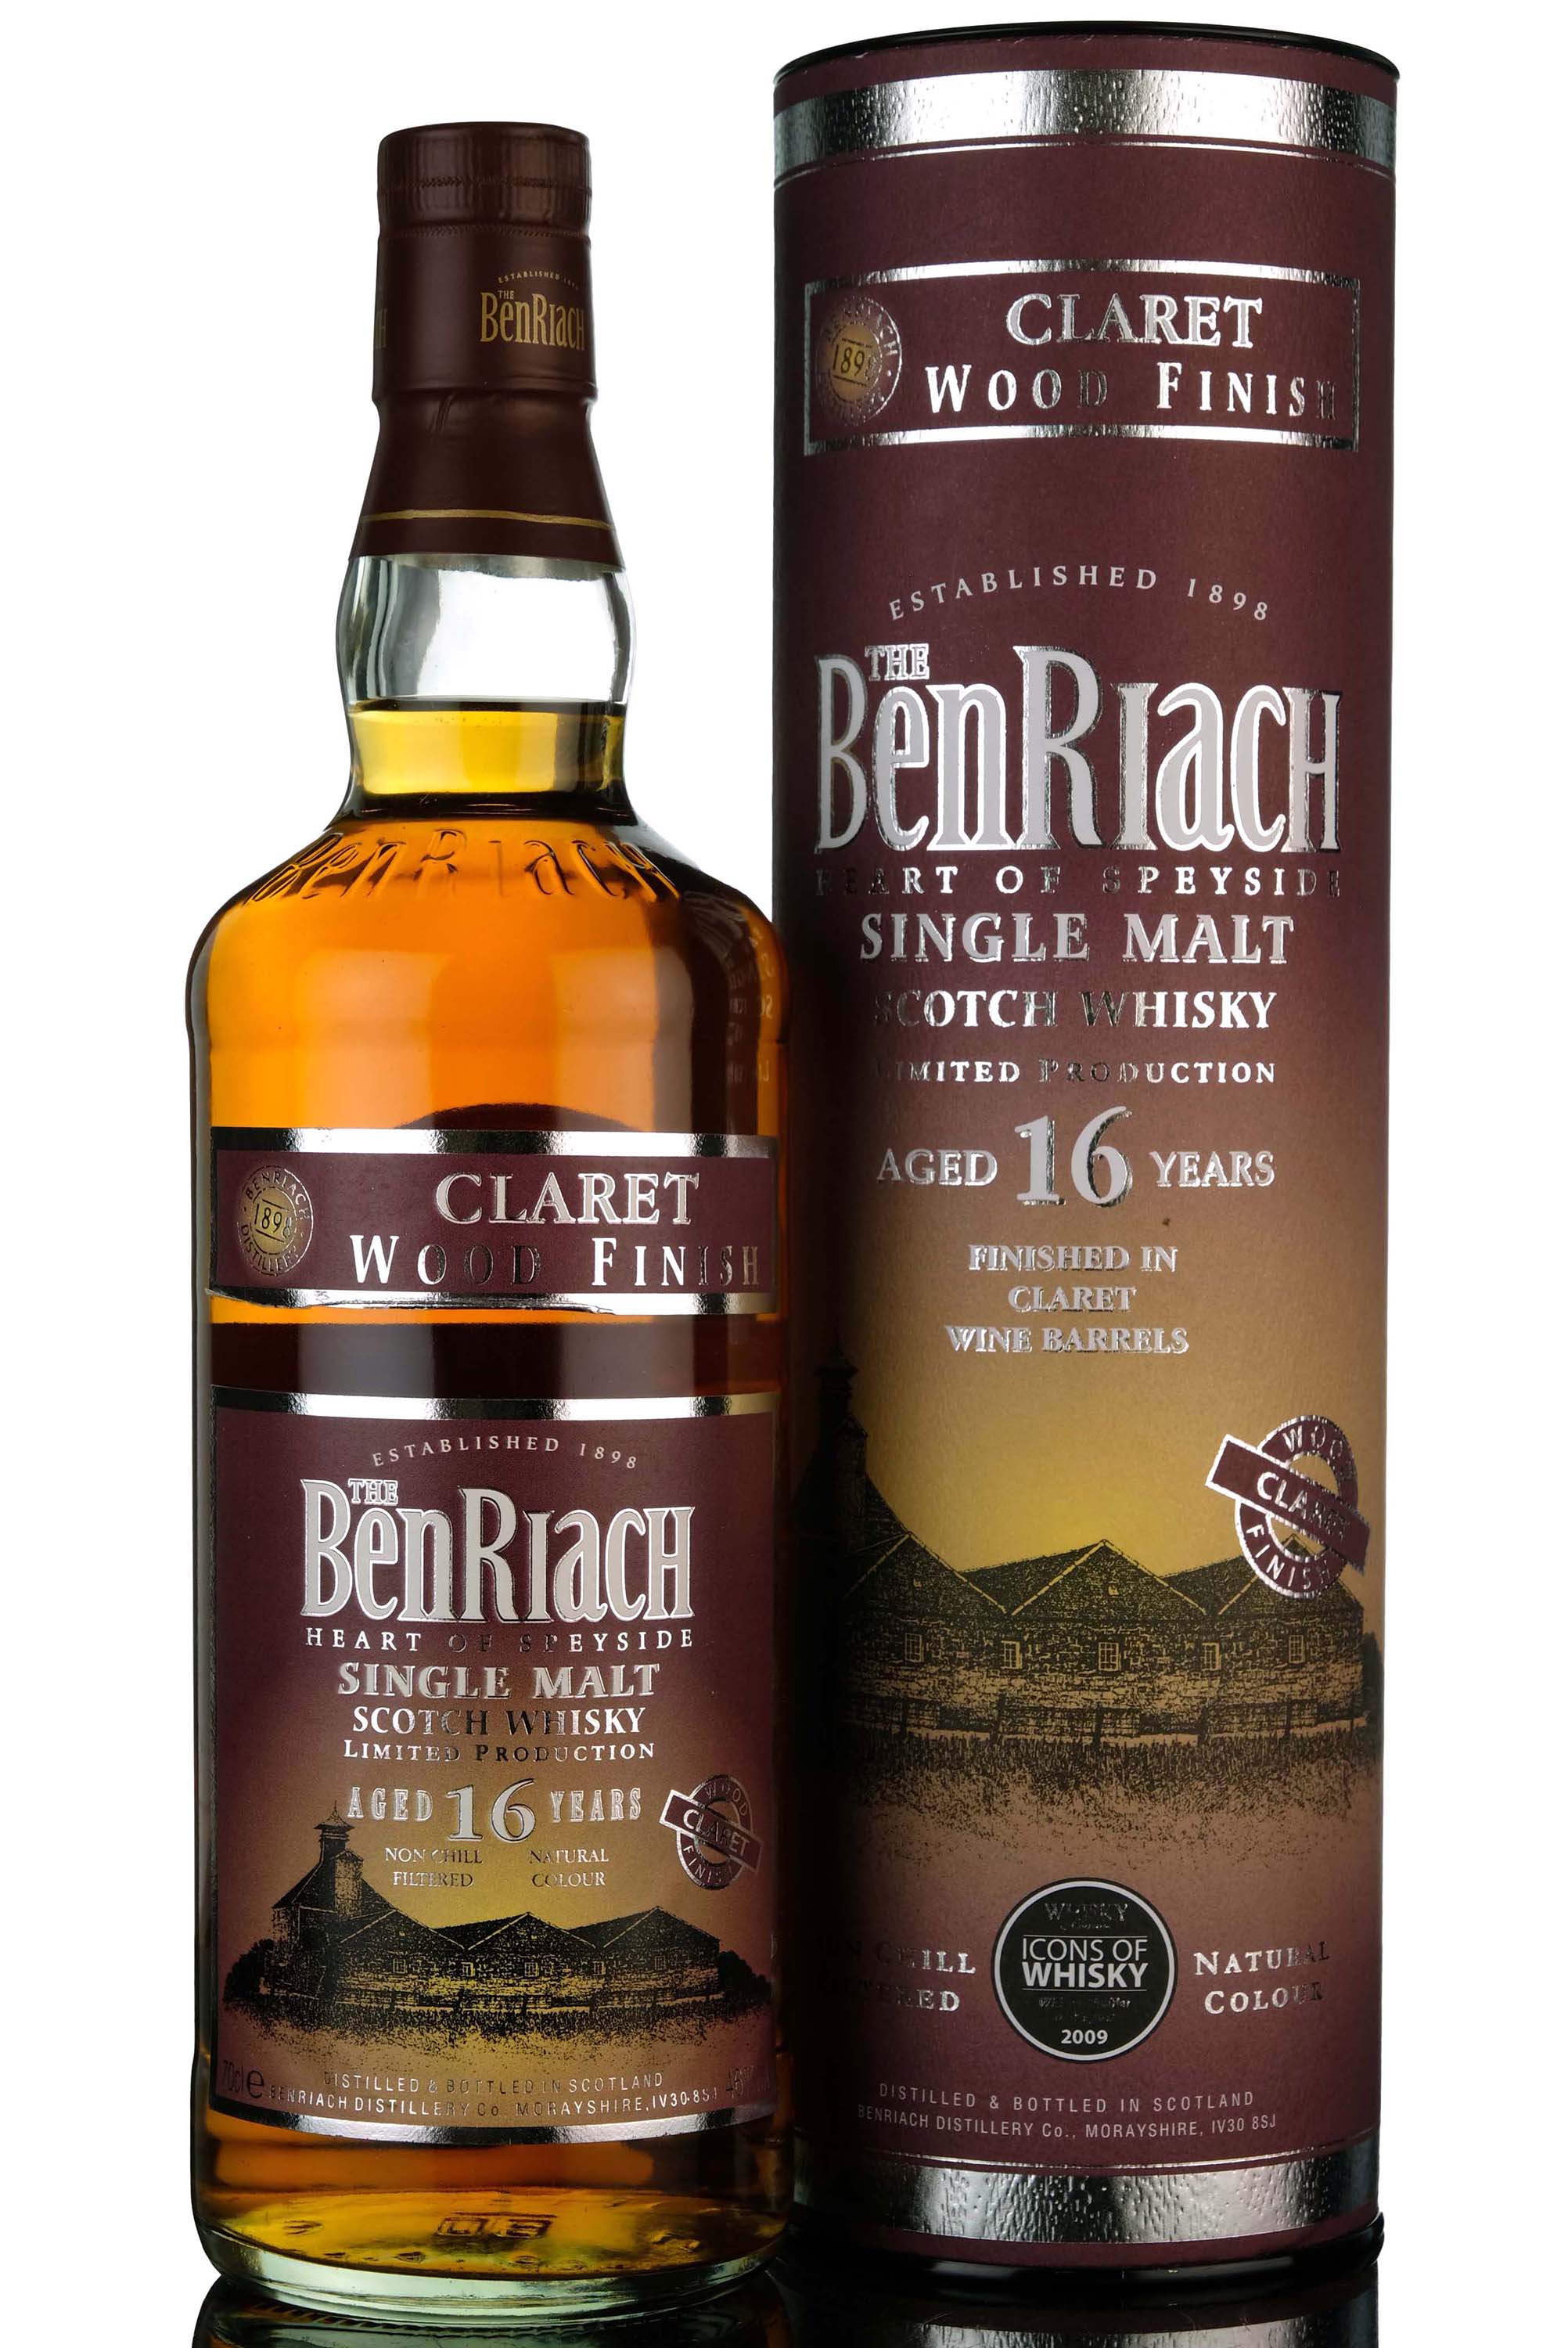 Benriach 16 Year Old - Claret Wood Finish